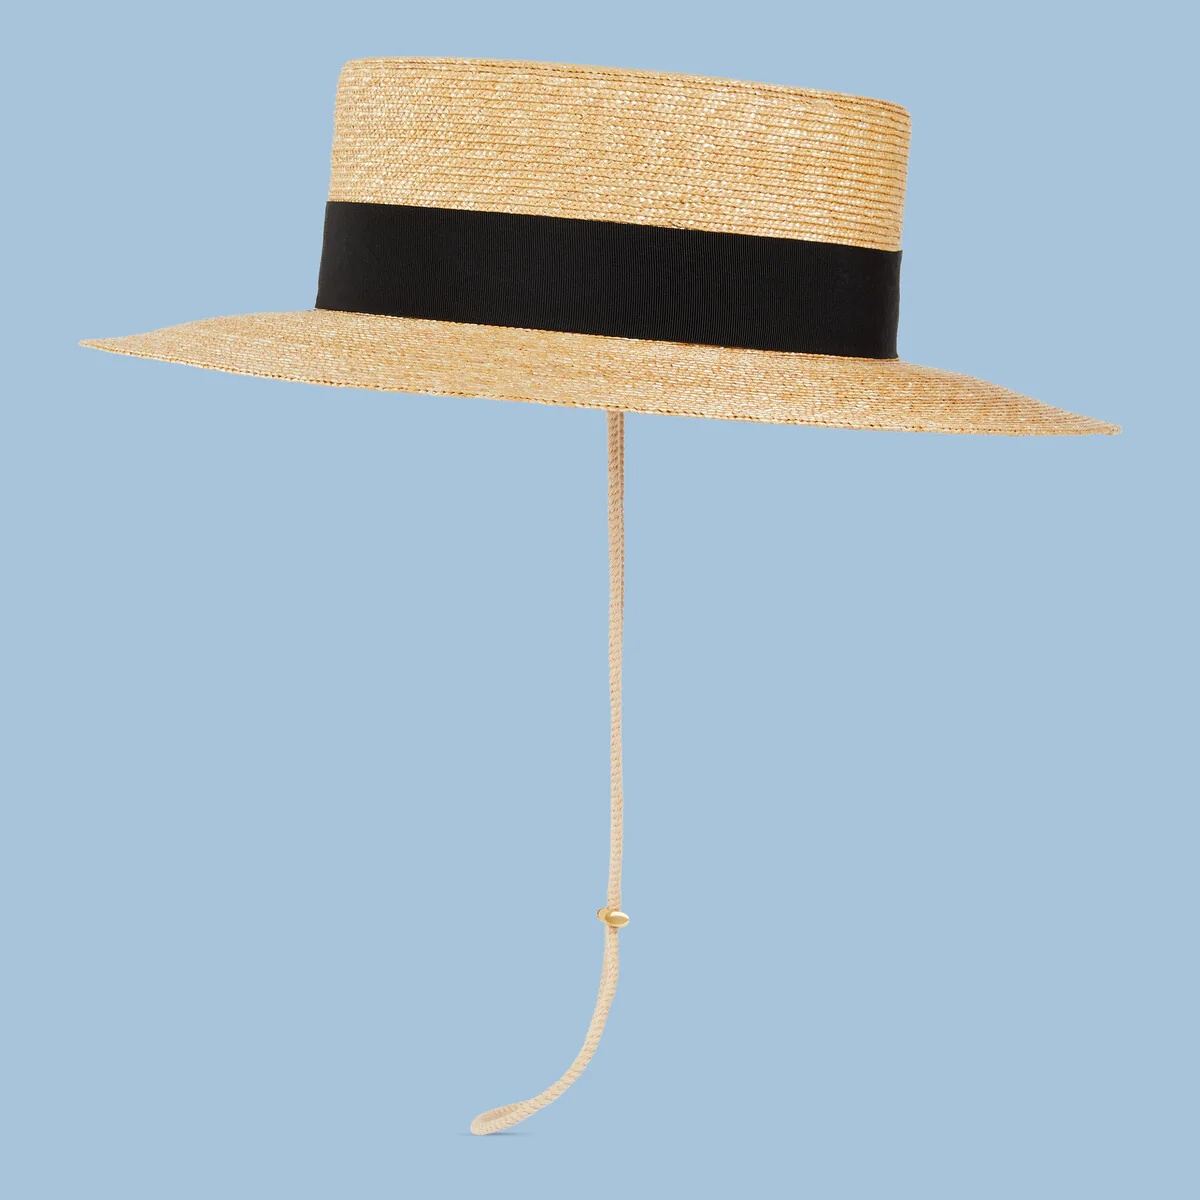 Straw boater hat - 2